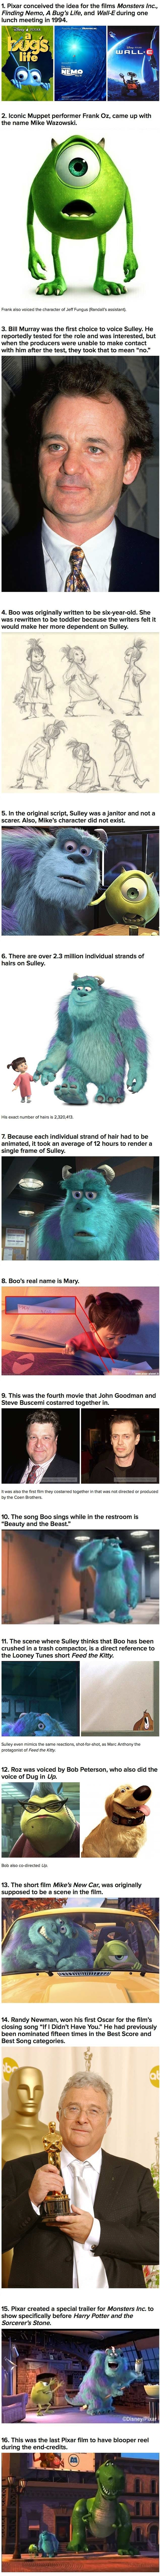 Monster Inc facts